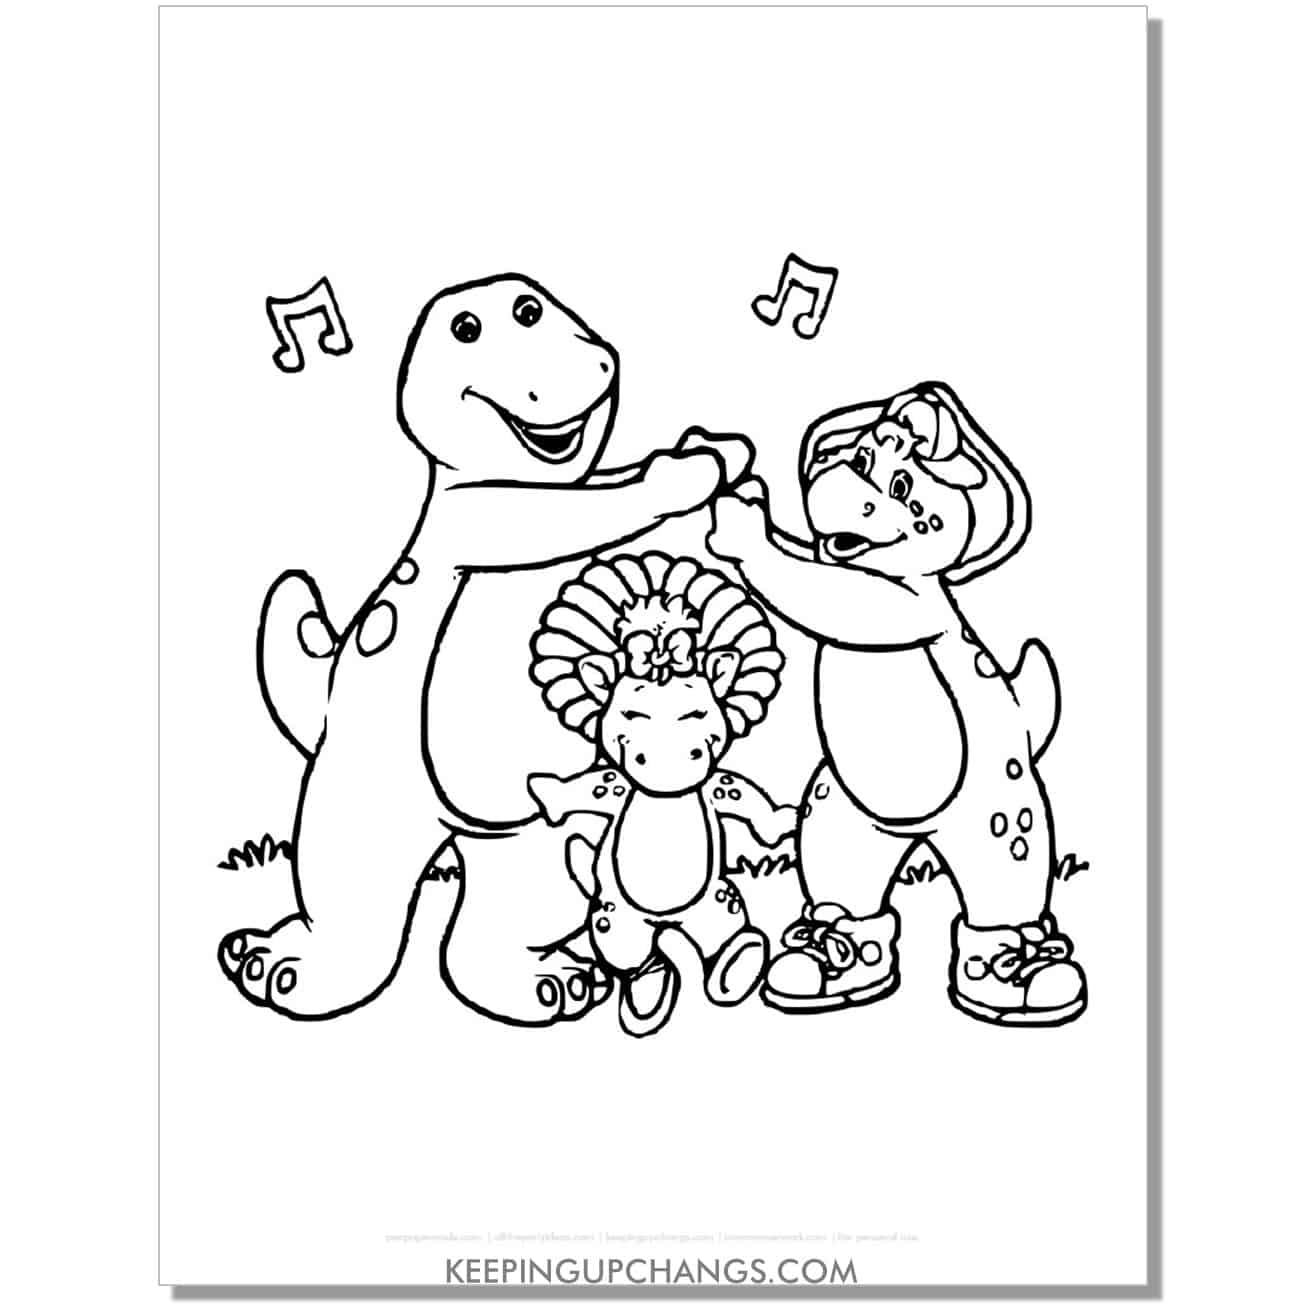 free barney, baby bop, bj singing i love you song coloring page, sheet.